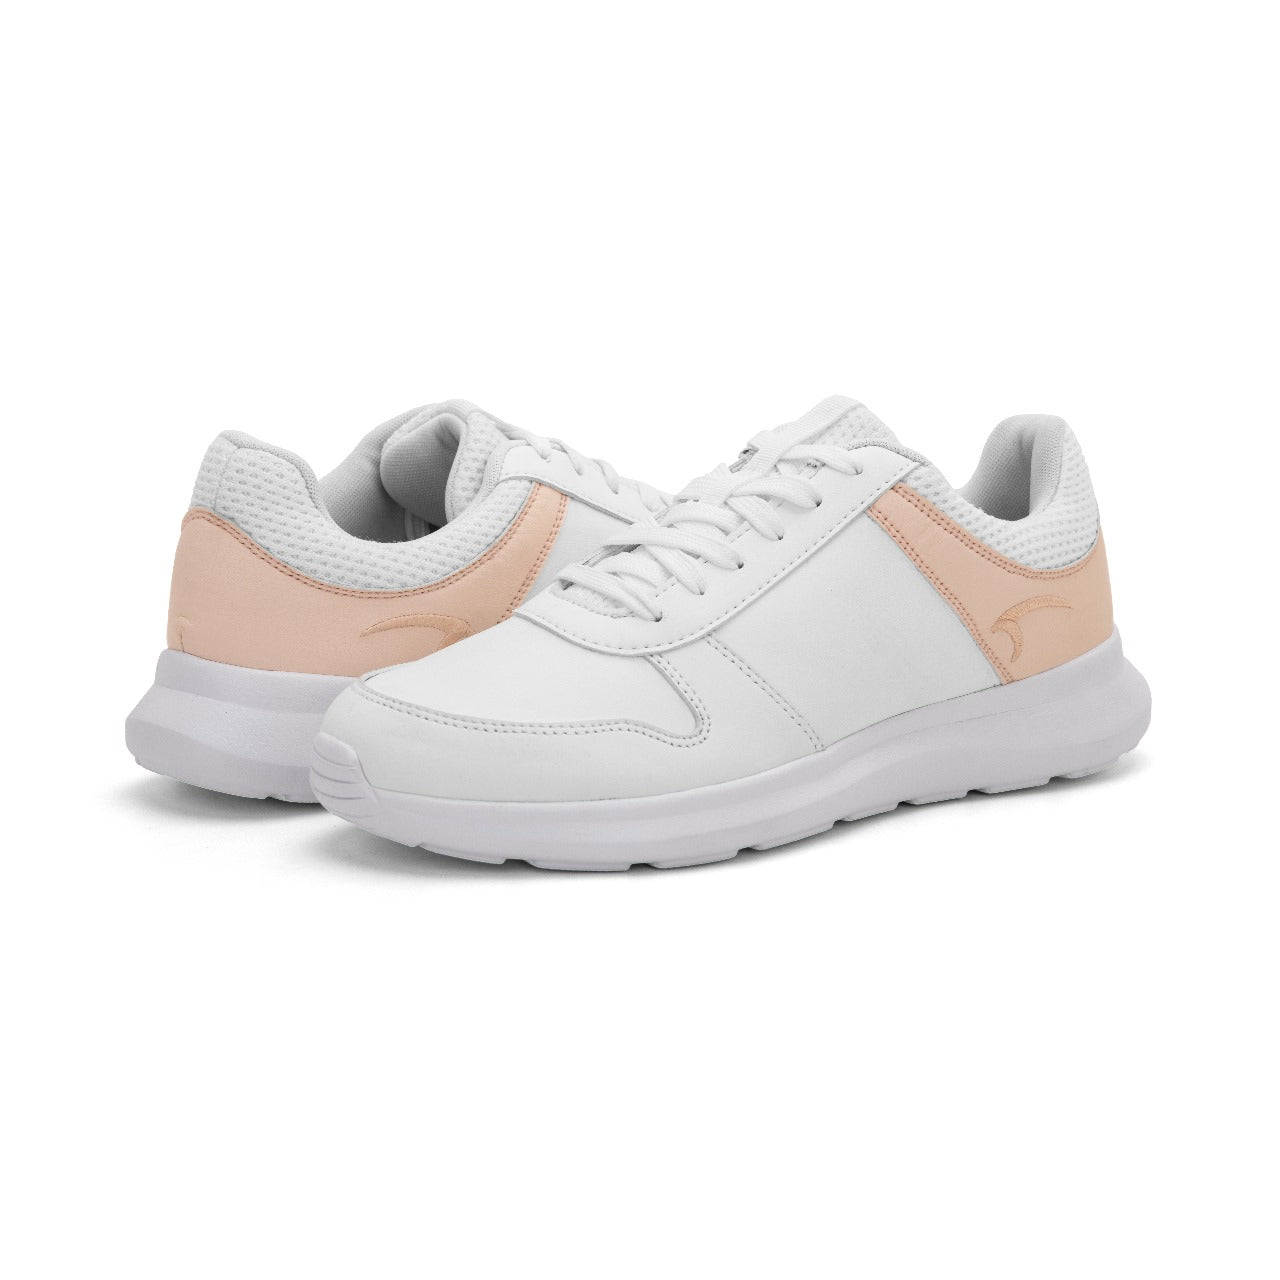 Mintra Alpha Lifestyle Shoes For Women, White & Pink